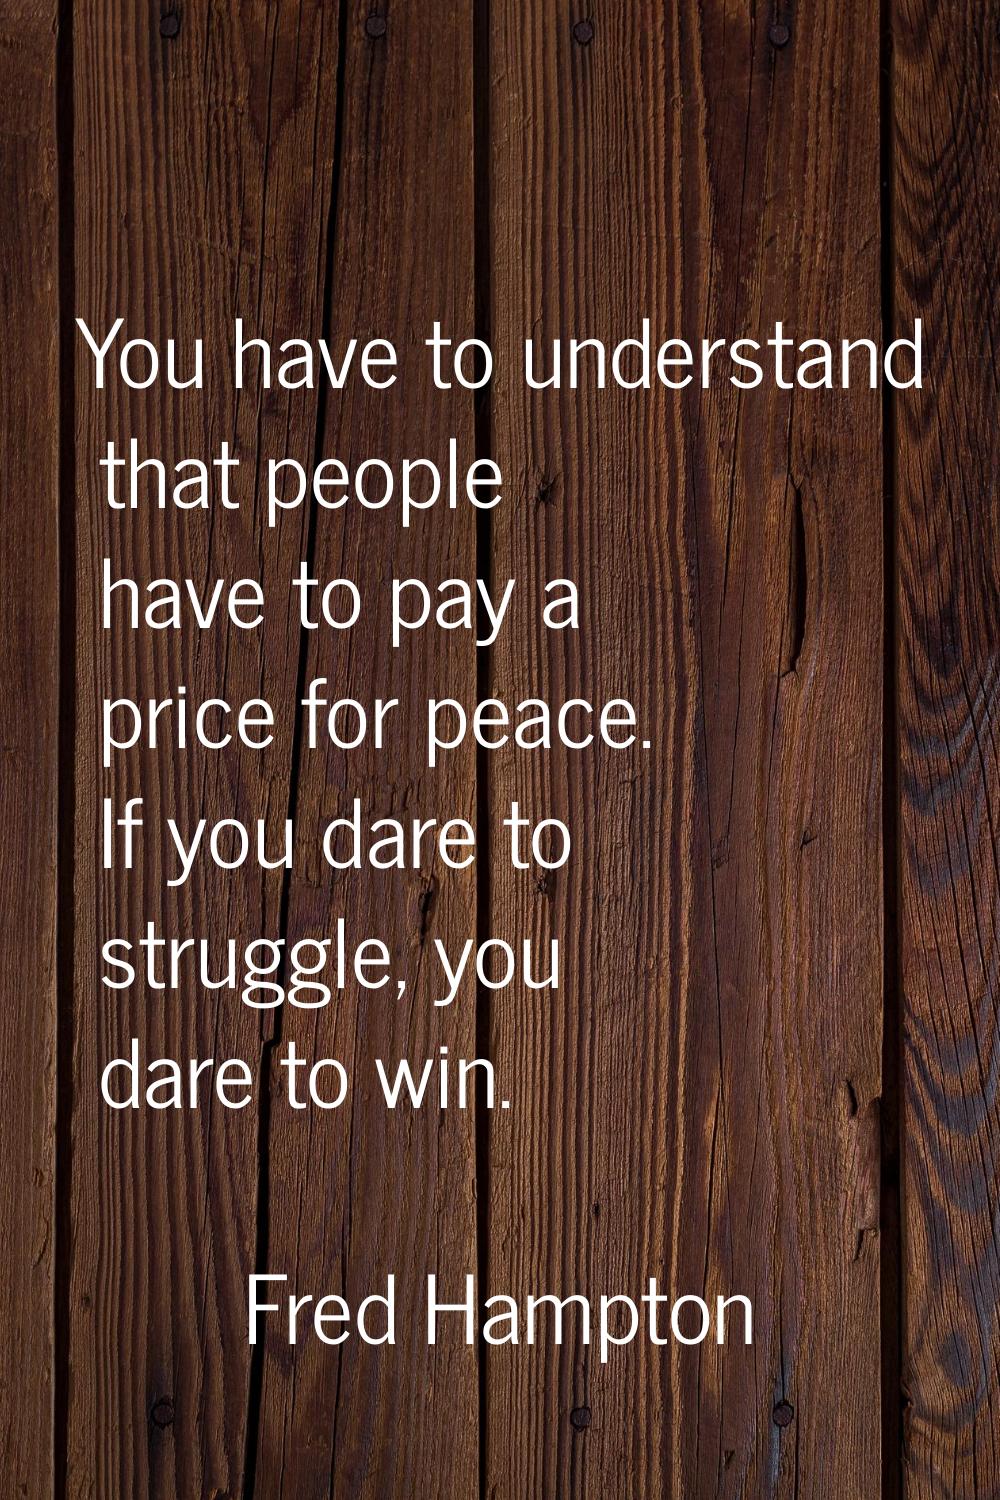 You have to understand that people have to pay a price for peace. If you dare to struggle, you dare